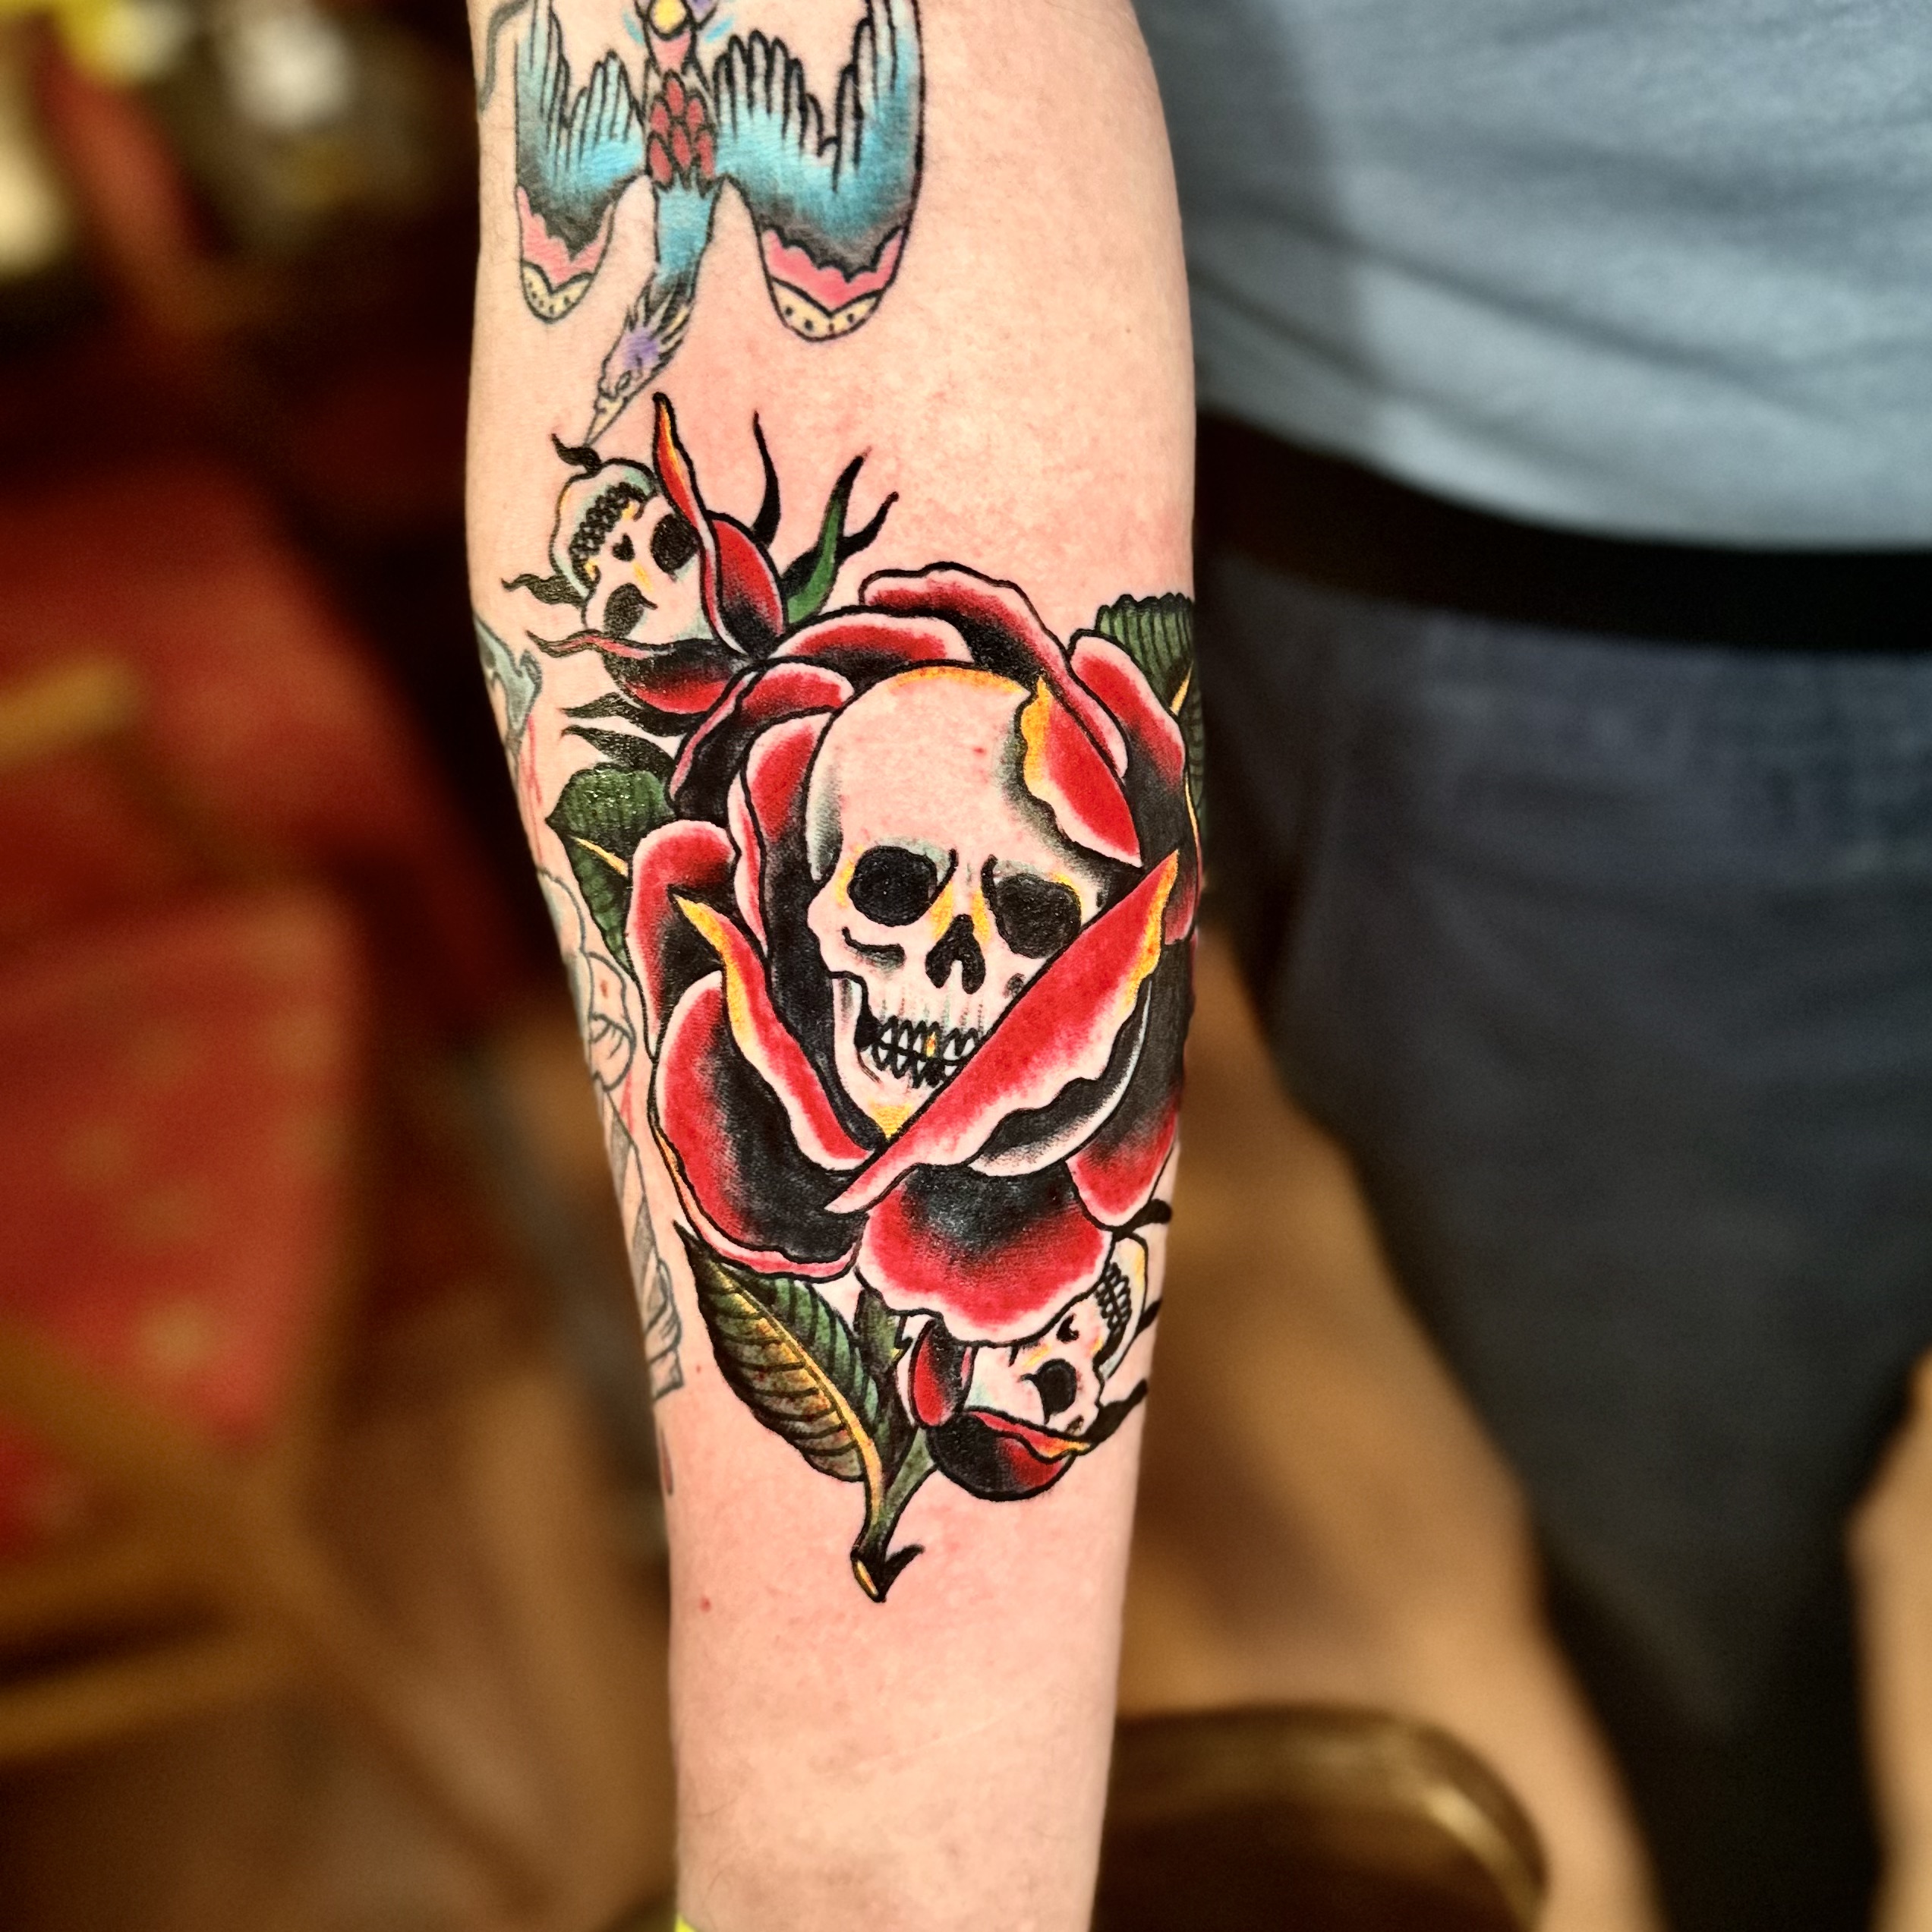 Tattoo of flowers and skulls from shop in Dallas